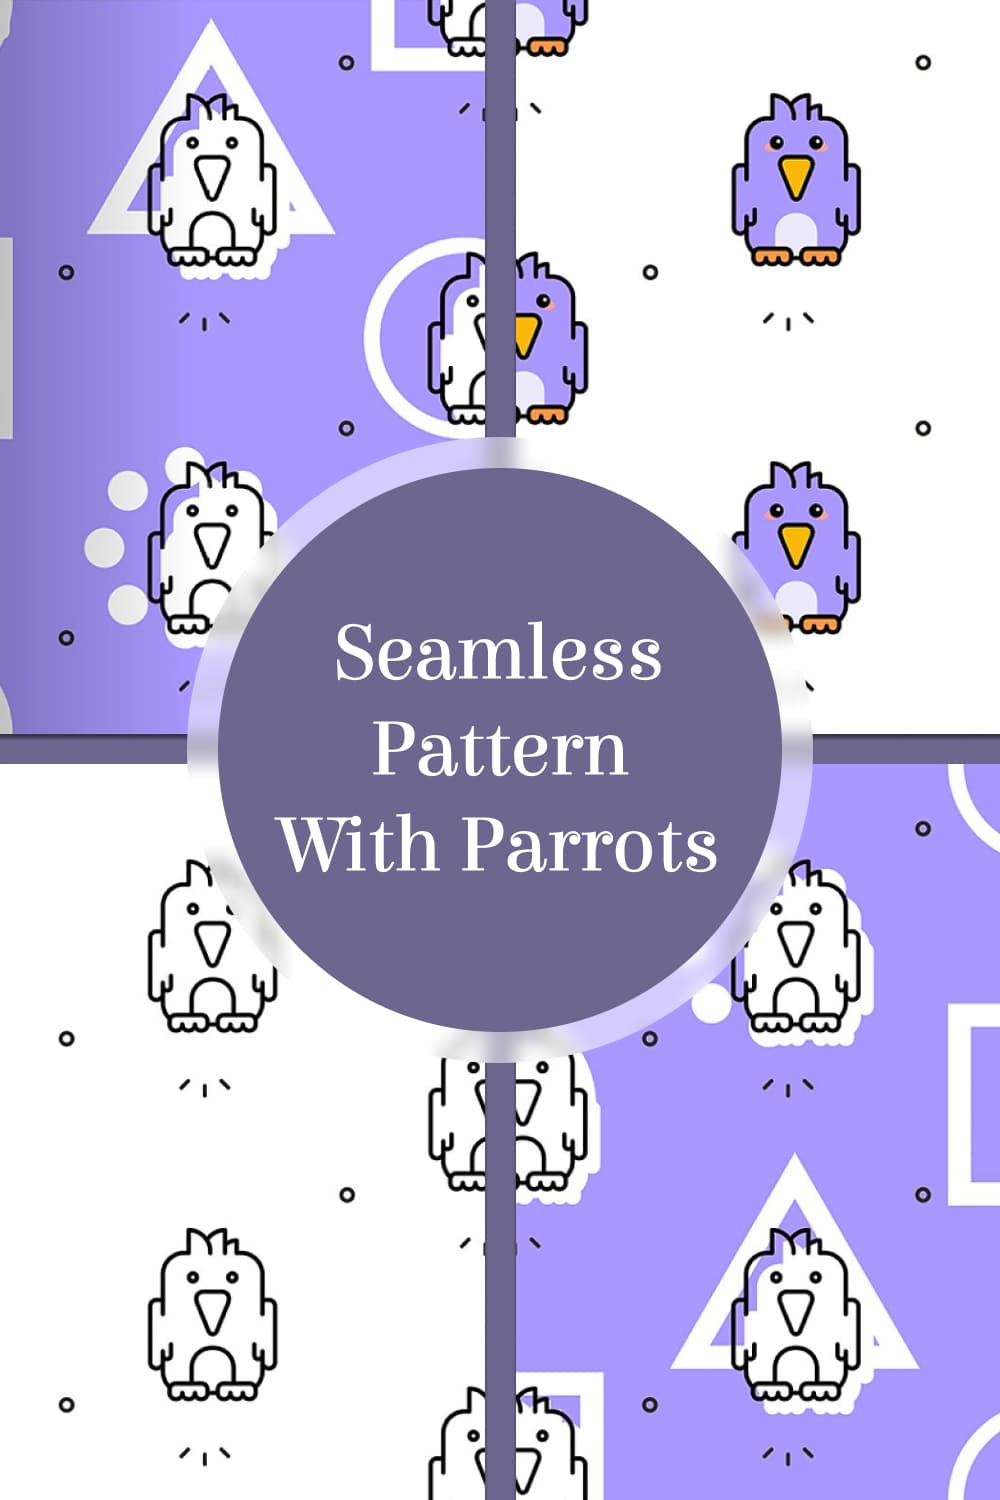 Seamless pattern with parrots - pinterest image preview.